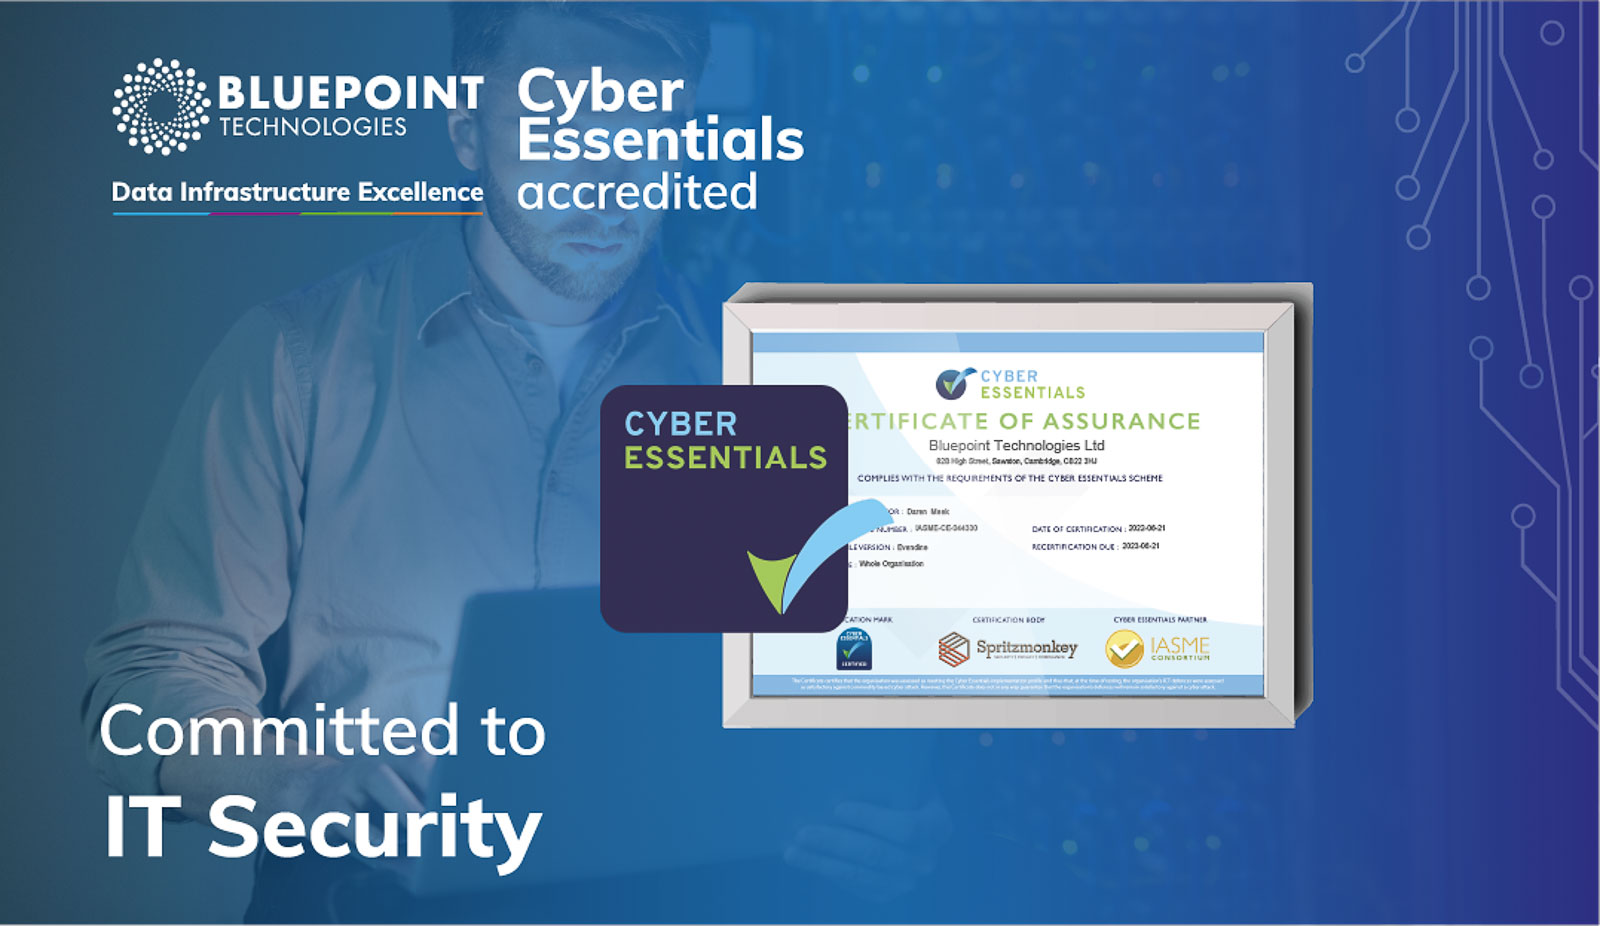 Bluepoint Gains Cyber Essentials Accreditation for Second Year Running